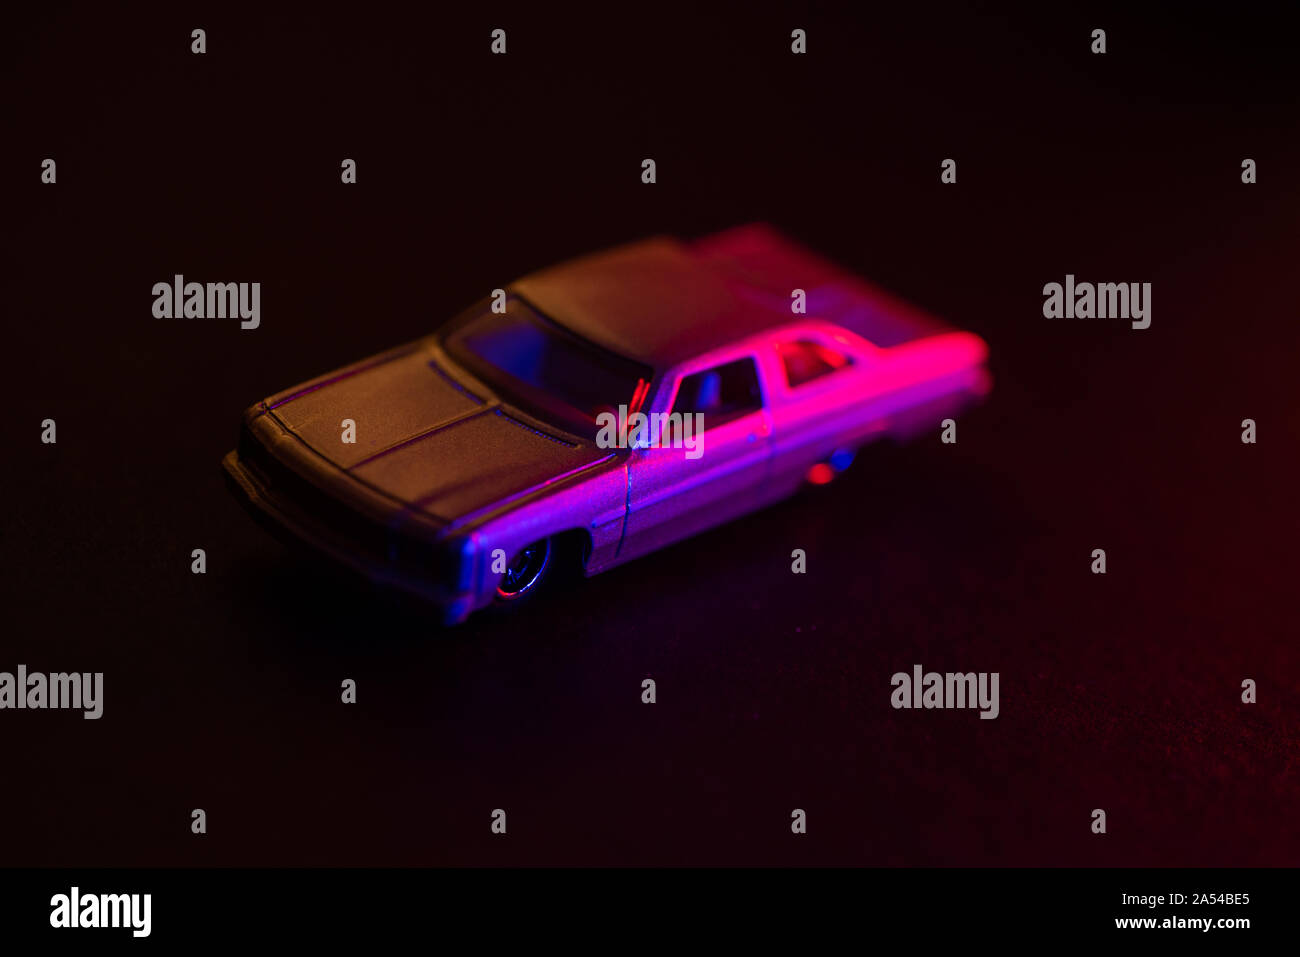 A toy car under red and blue lights, dark background. Stock Photo